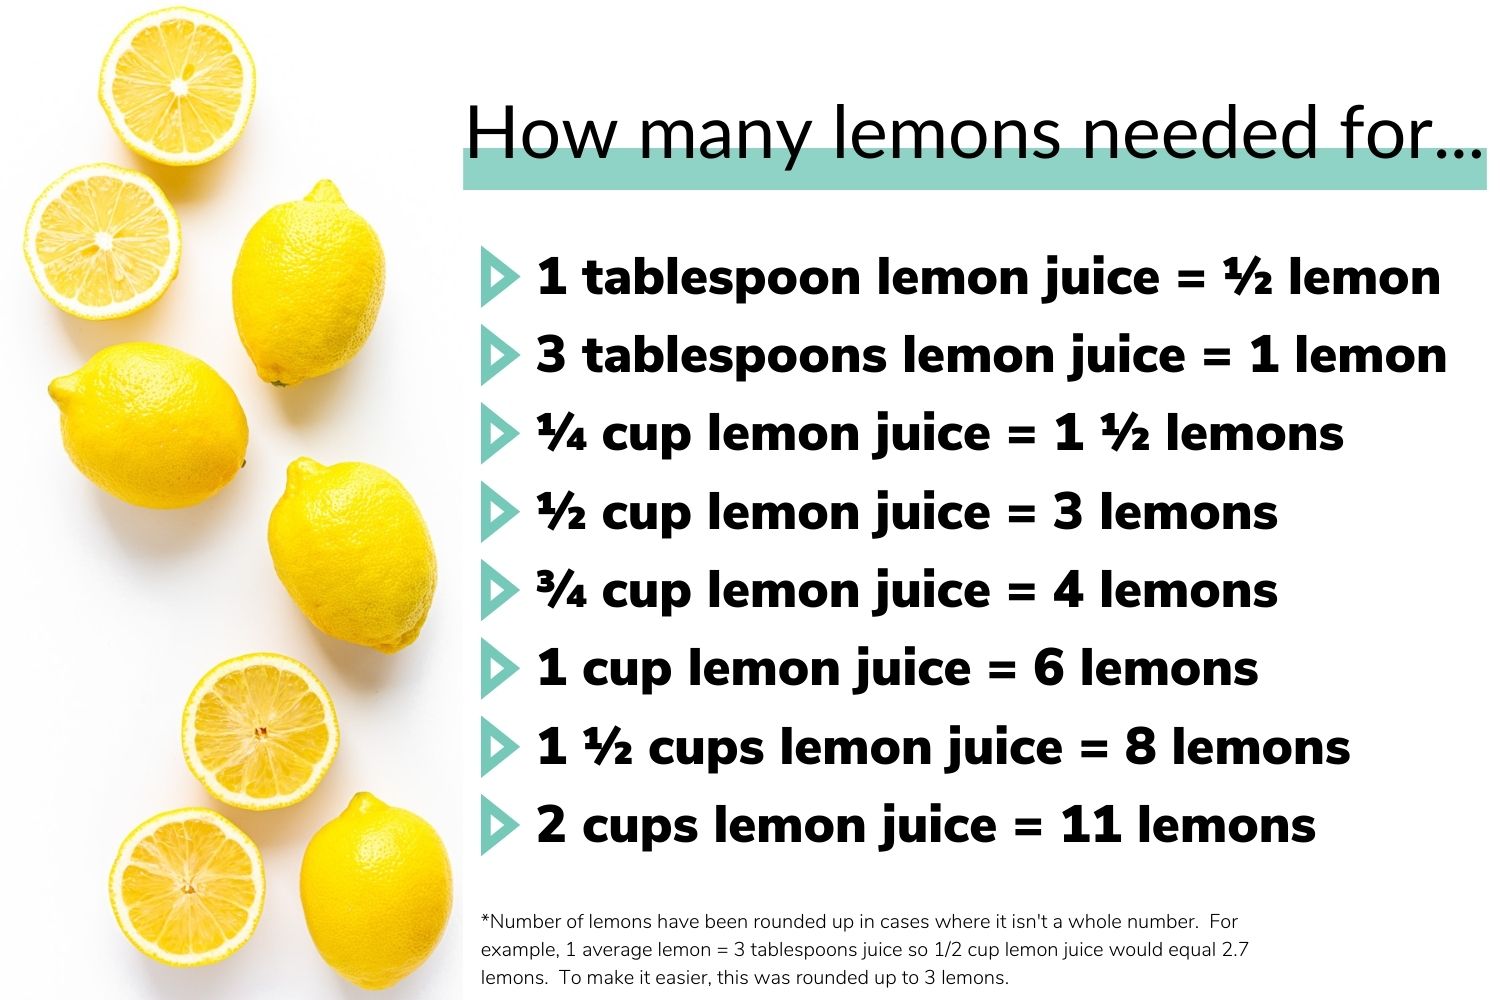 Lemon juice conversion graphic showing how many lemons are needed for various quantities of lemon juice.